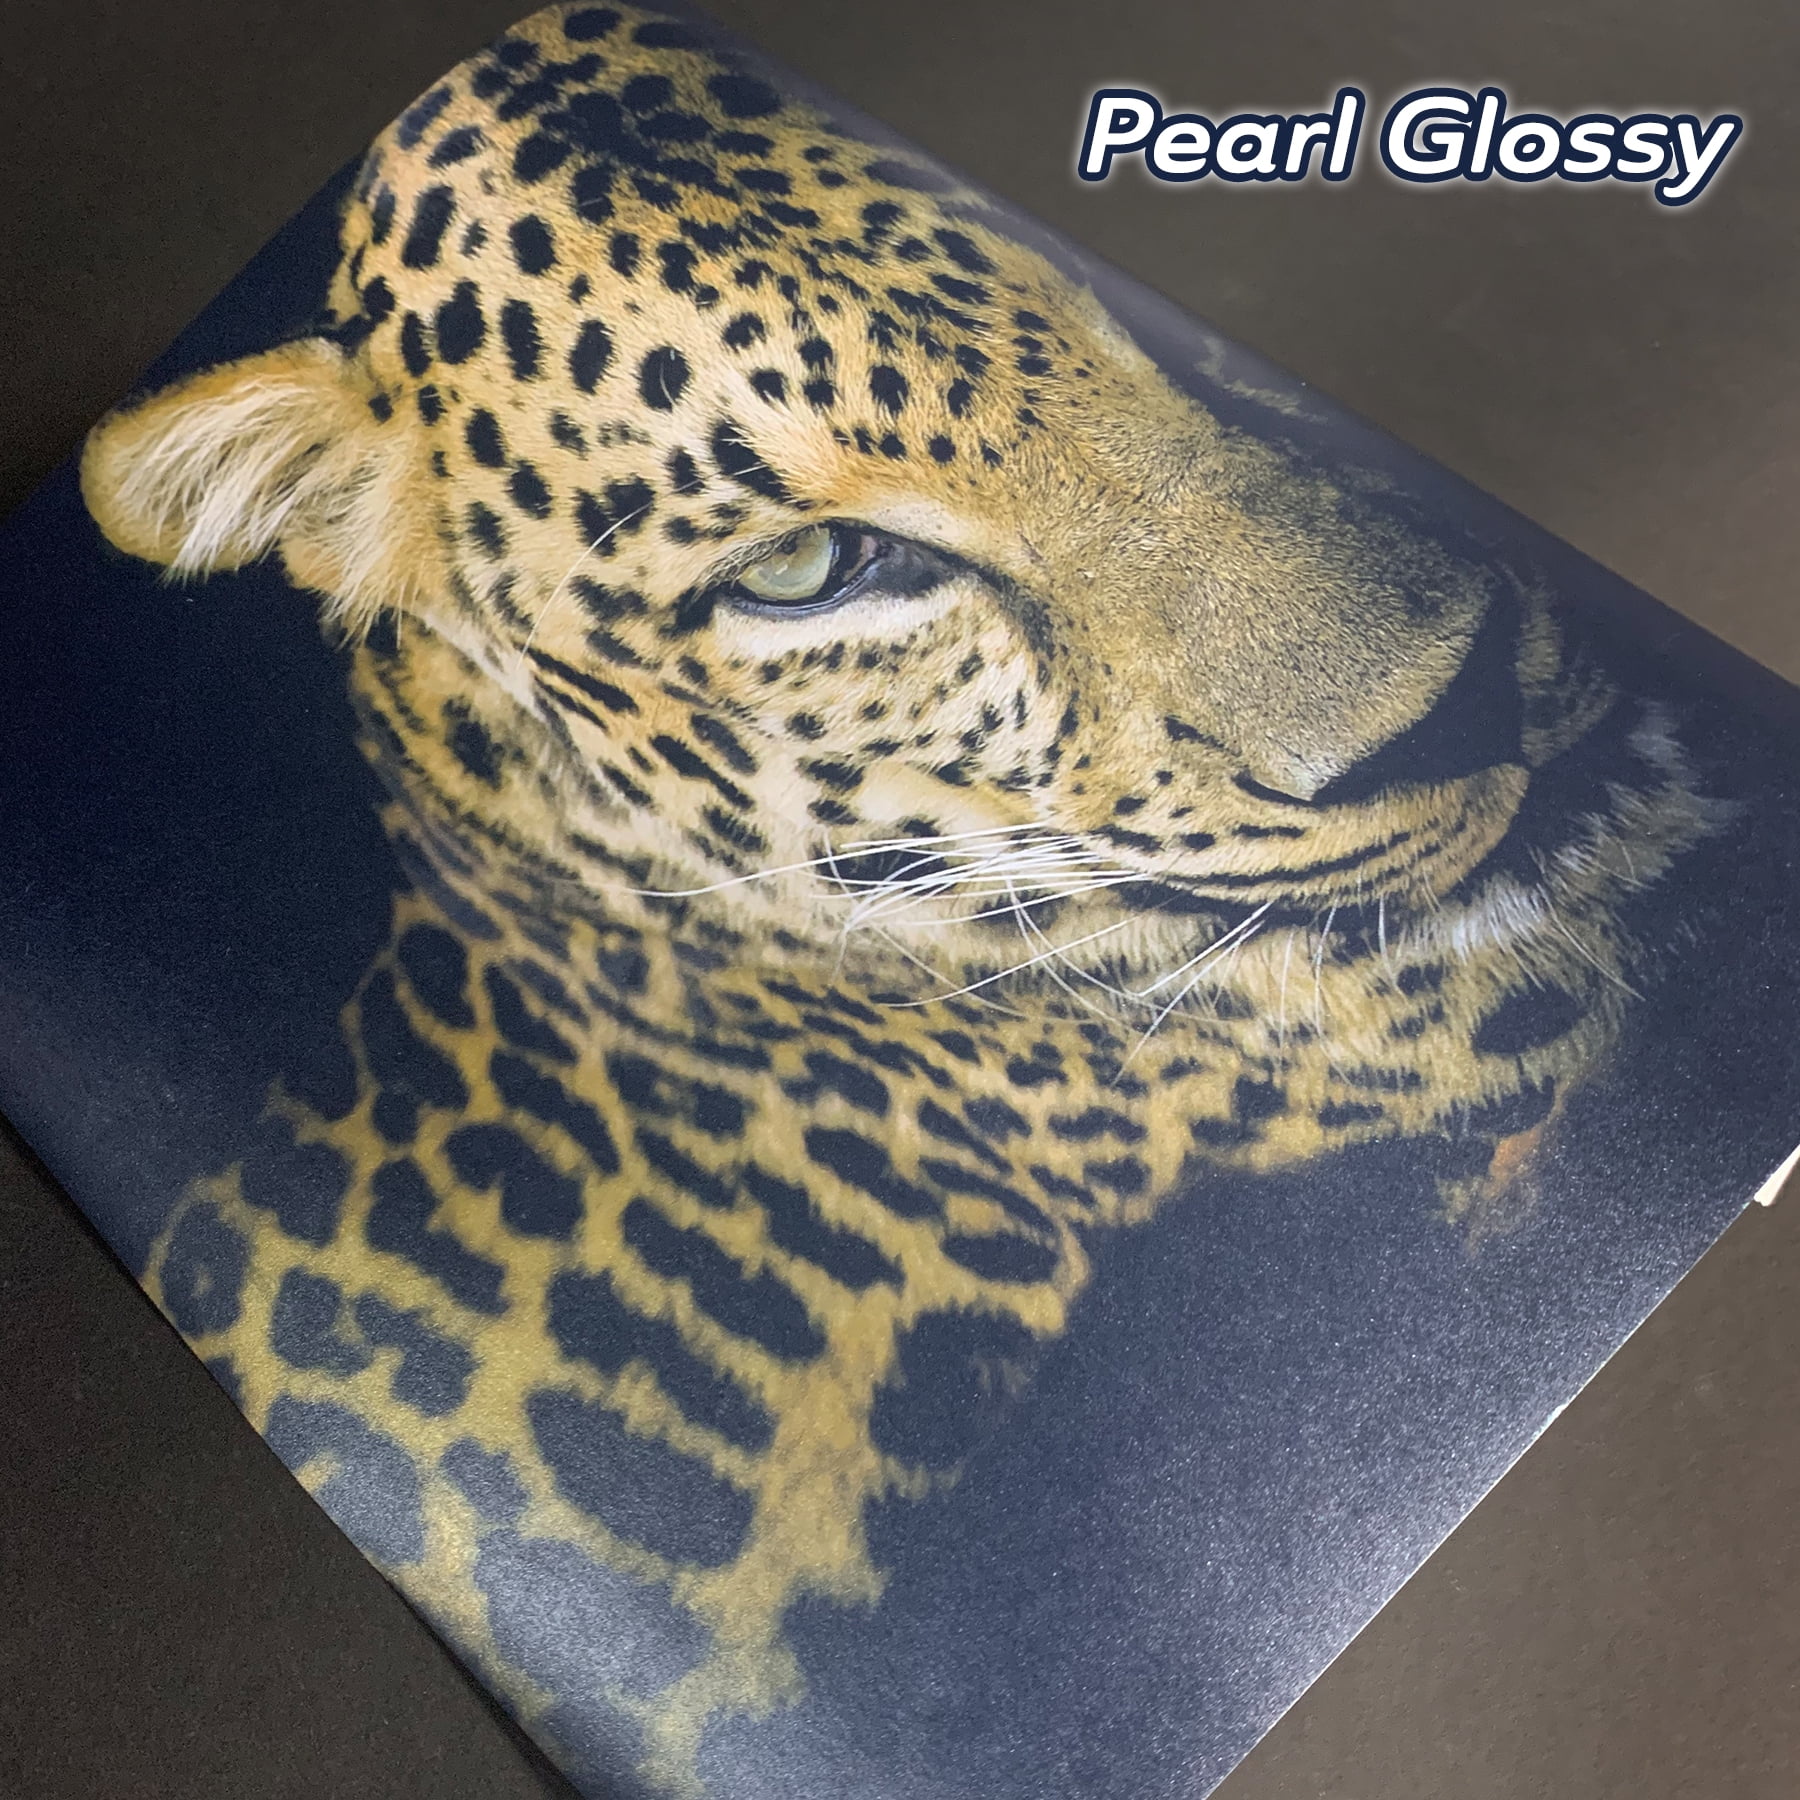 Koala Glossy Thin Inkjet Paper for DIY Chip Bag 8.5x11 Inches 100 Sheets  and Pearl Glossy Thin Photo Paper 8.5x11 Inches 40 Sheets 30lbs